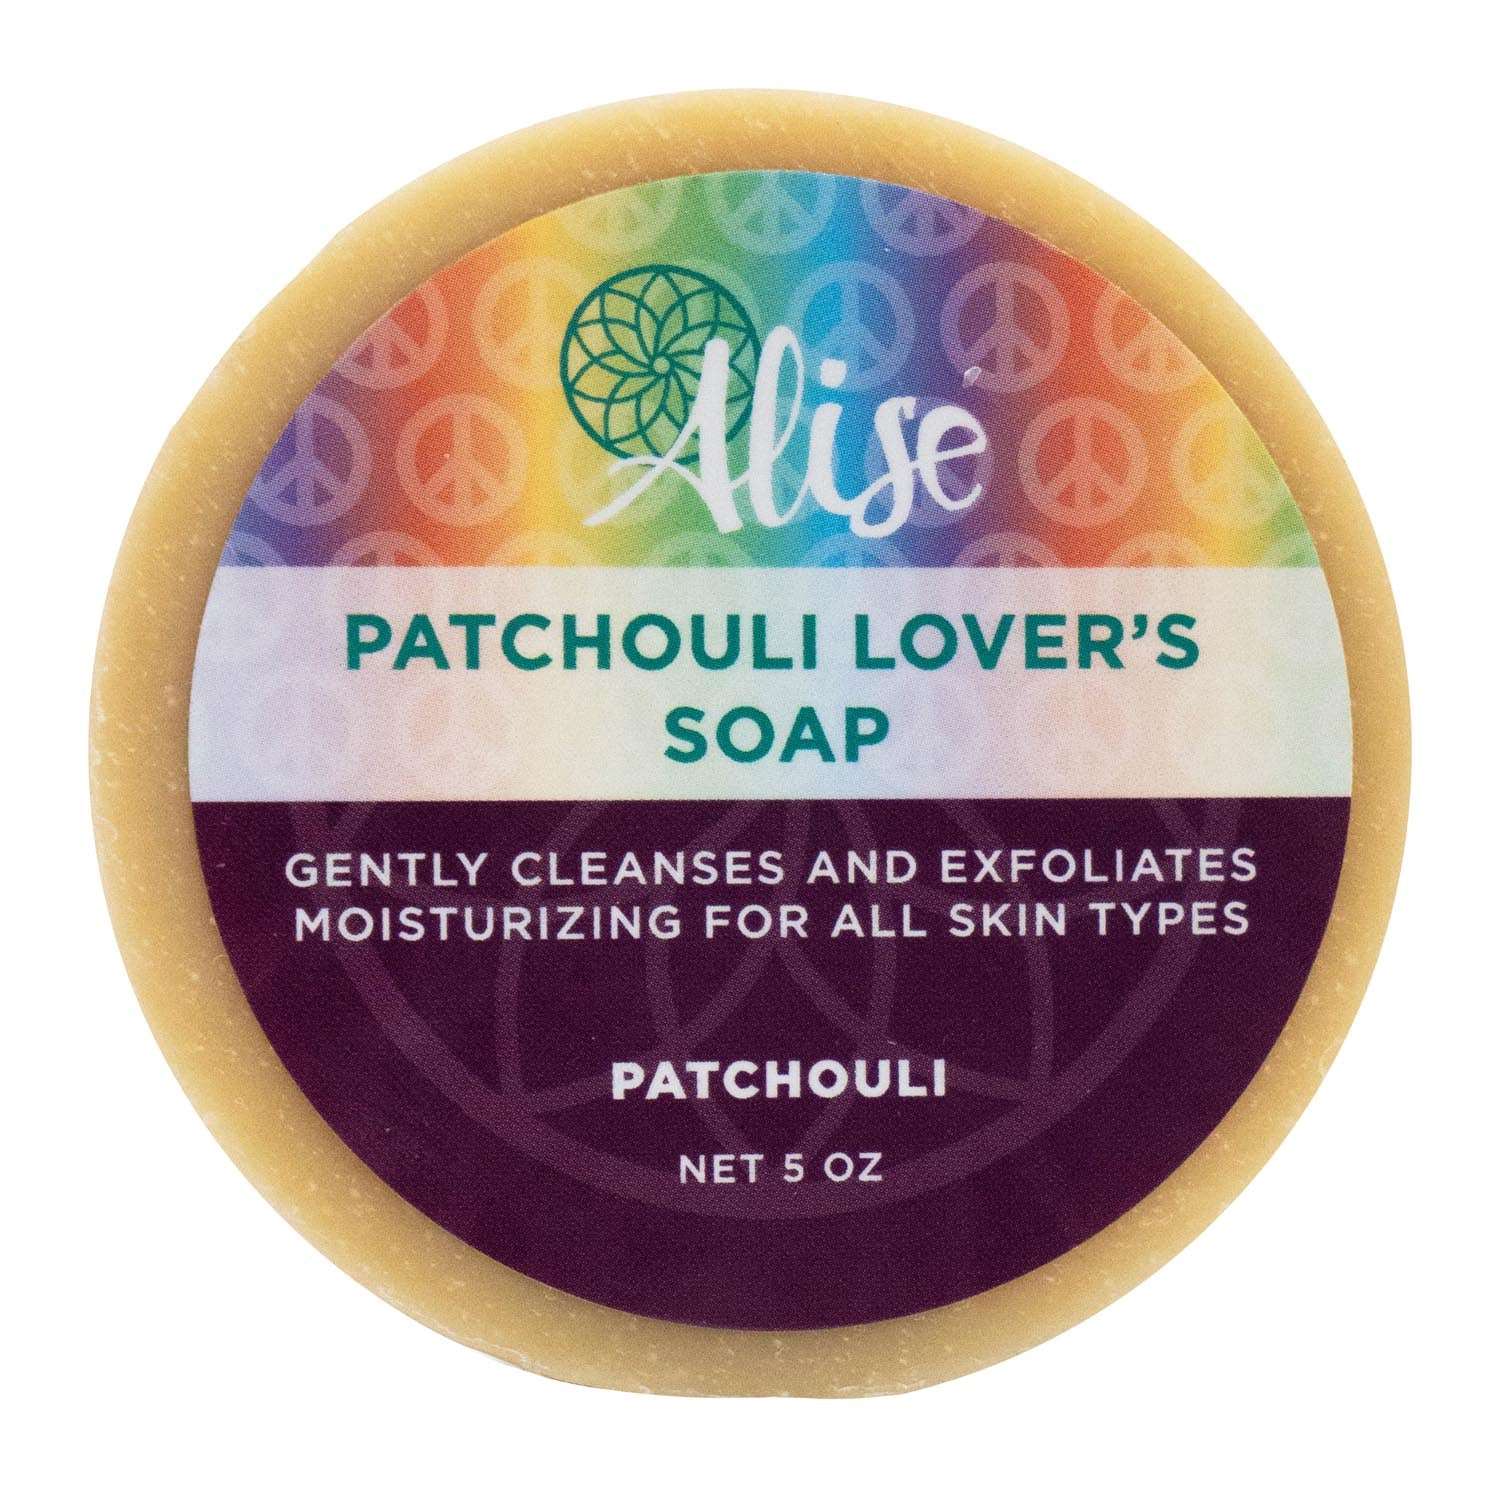 Patchouli Lovers Soap 5oz handcrafted by Alise Body Care